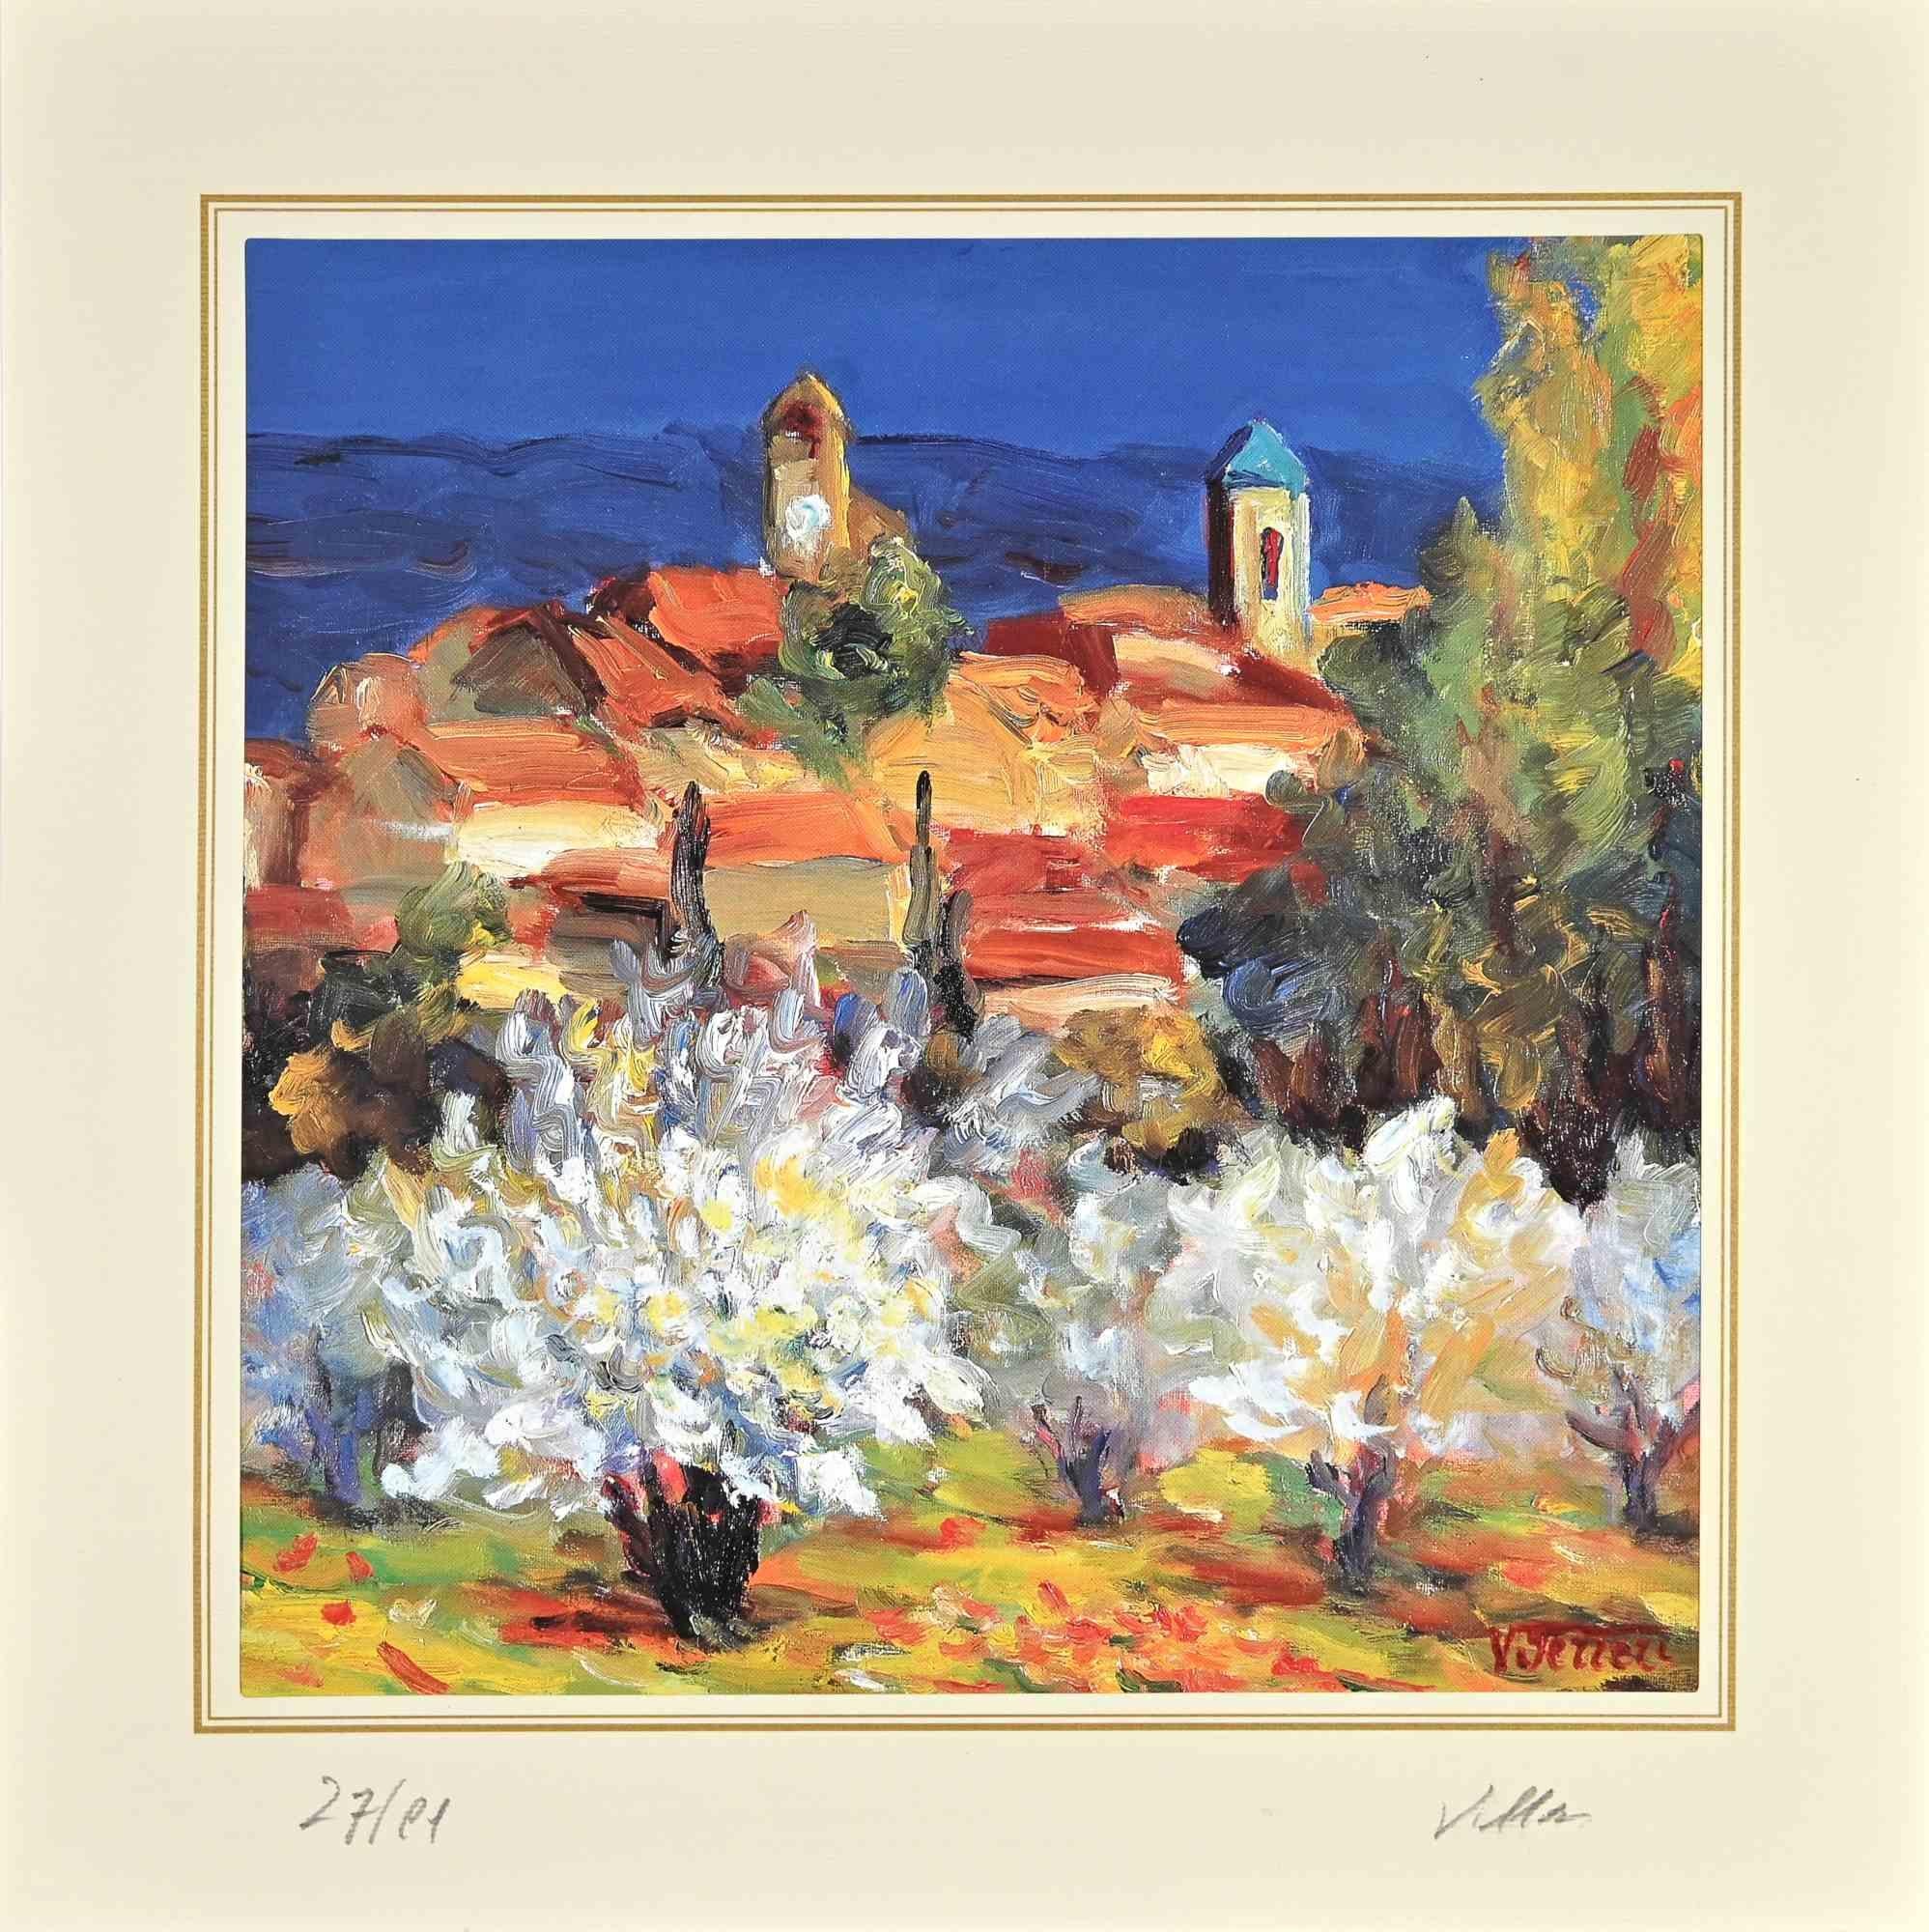 Landscape is a lithograph realized by Luciano Villani in the late 20th Century.

Numbered, Edition, 27/91.

Hand-signed. Excellent condition.

The artwork is depicted through harmonious colors in a well-balanced composition.